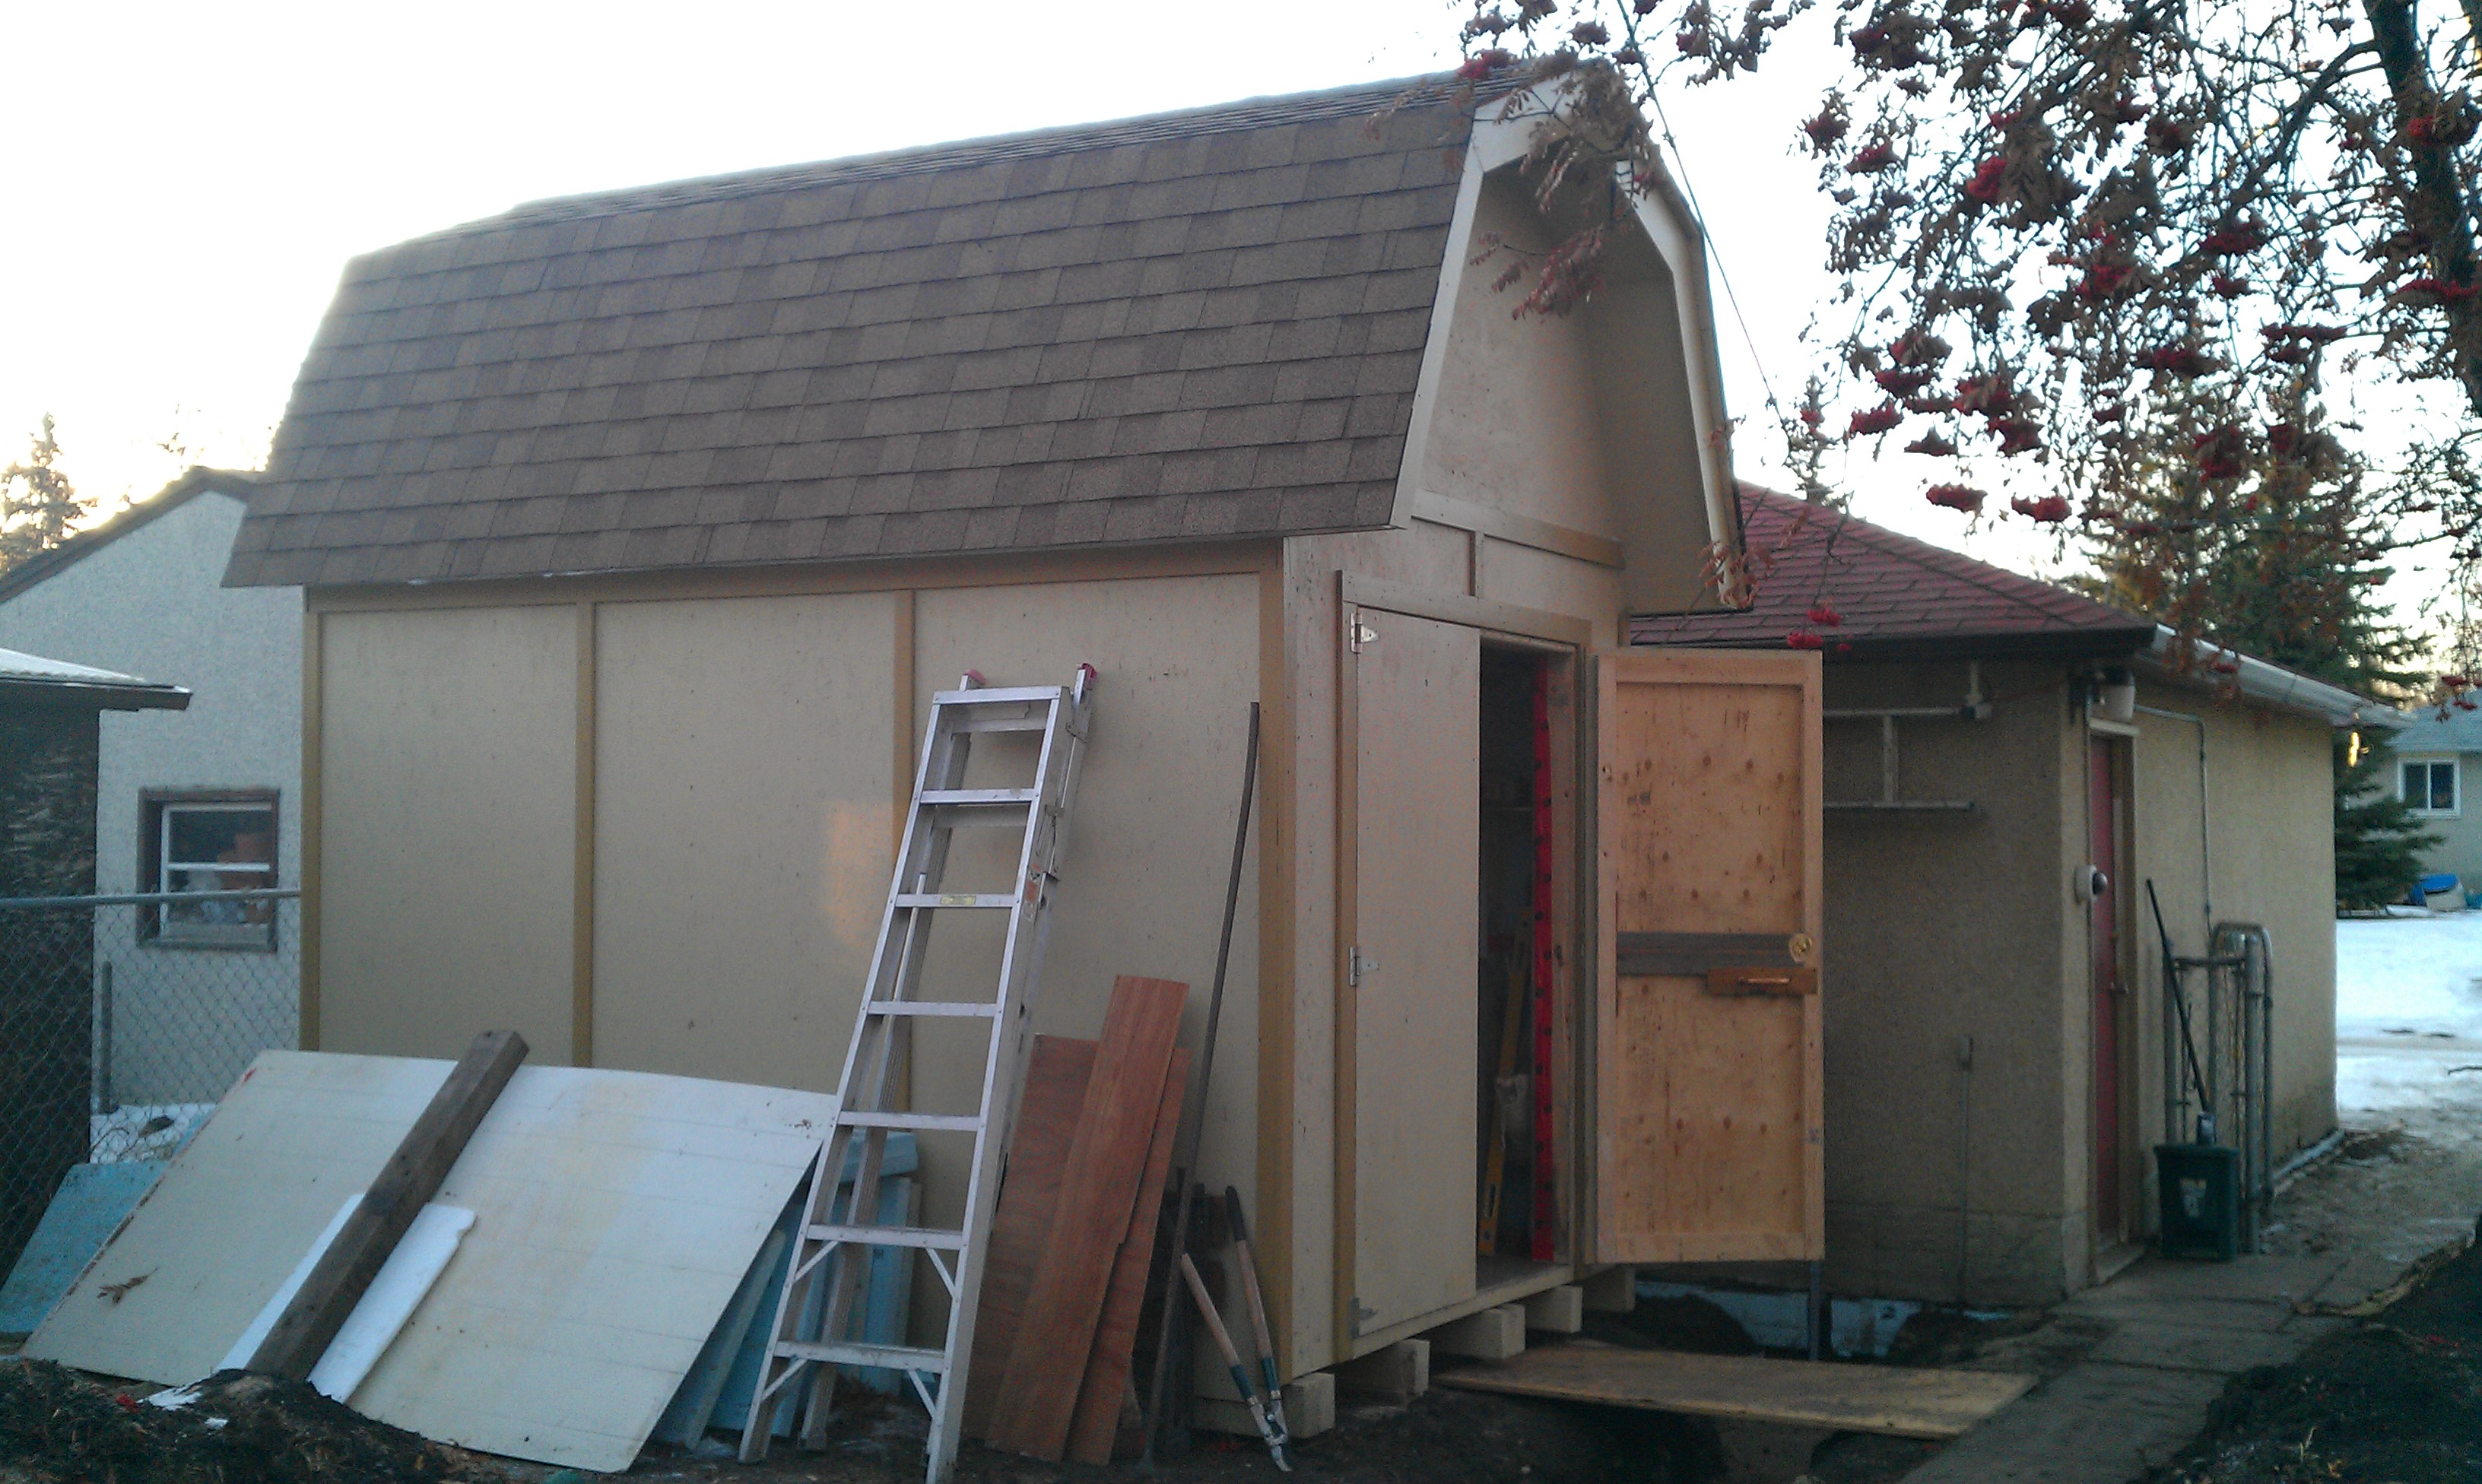 Two story 8x12hed. open loft in top with 44" headroom.I  used a "Gorrilla" garage lift platform for the elevator.